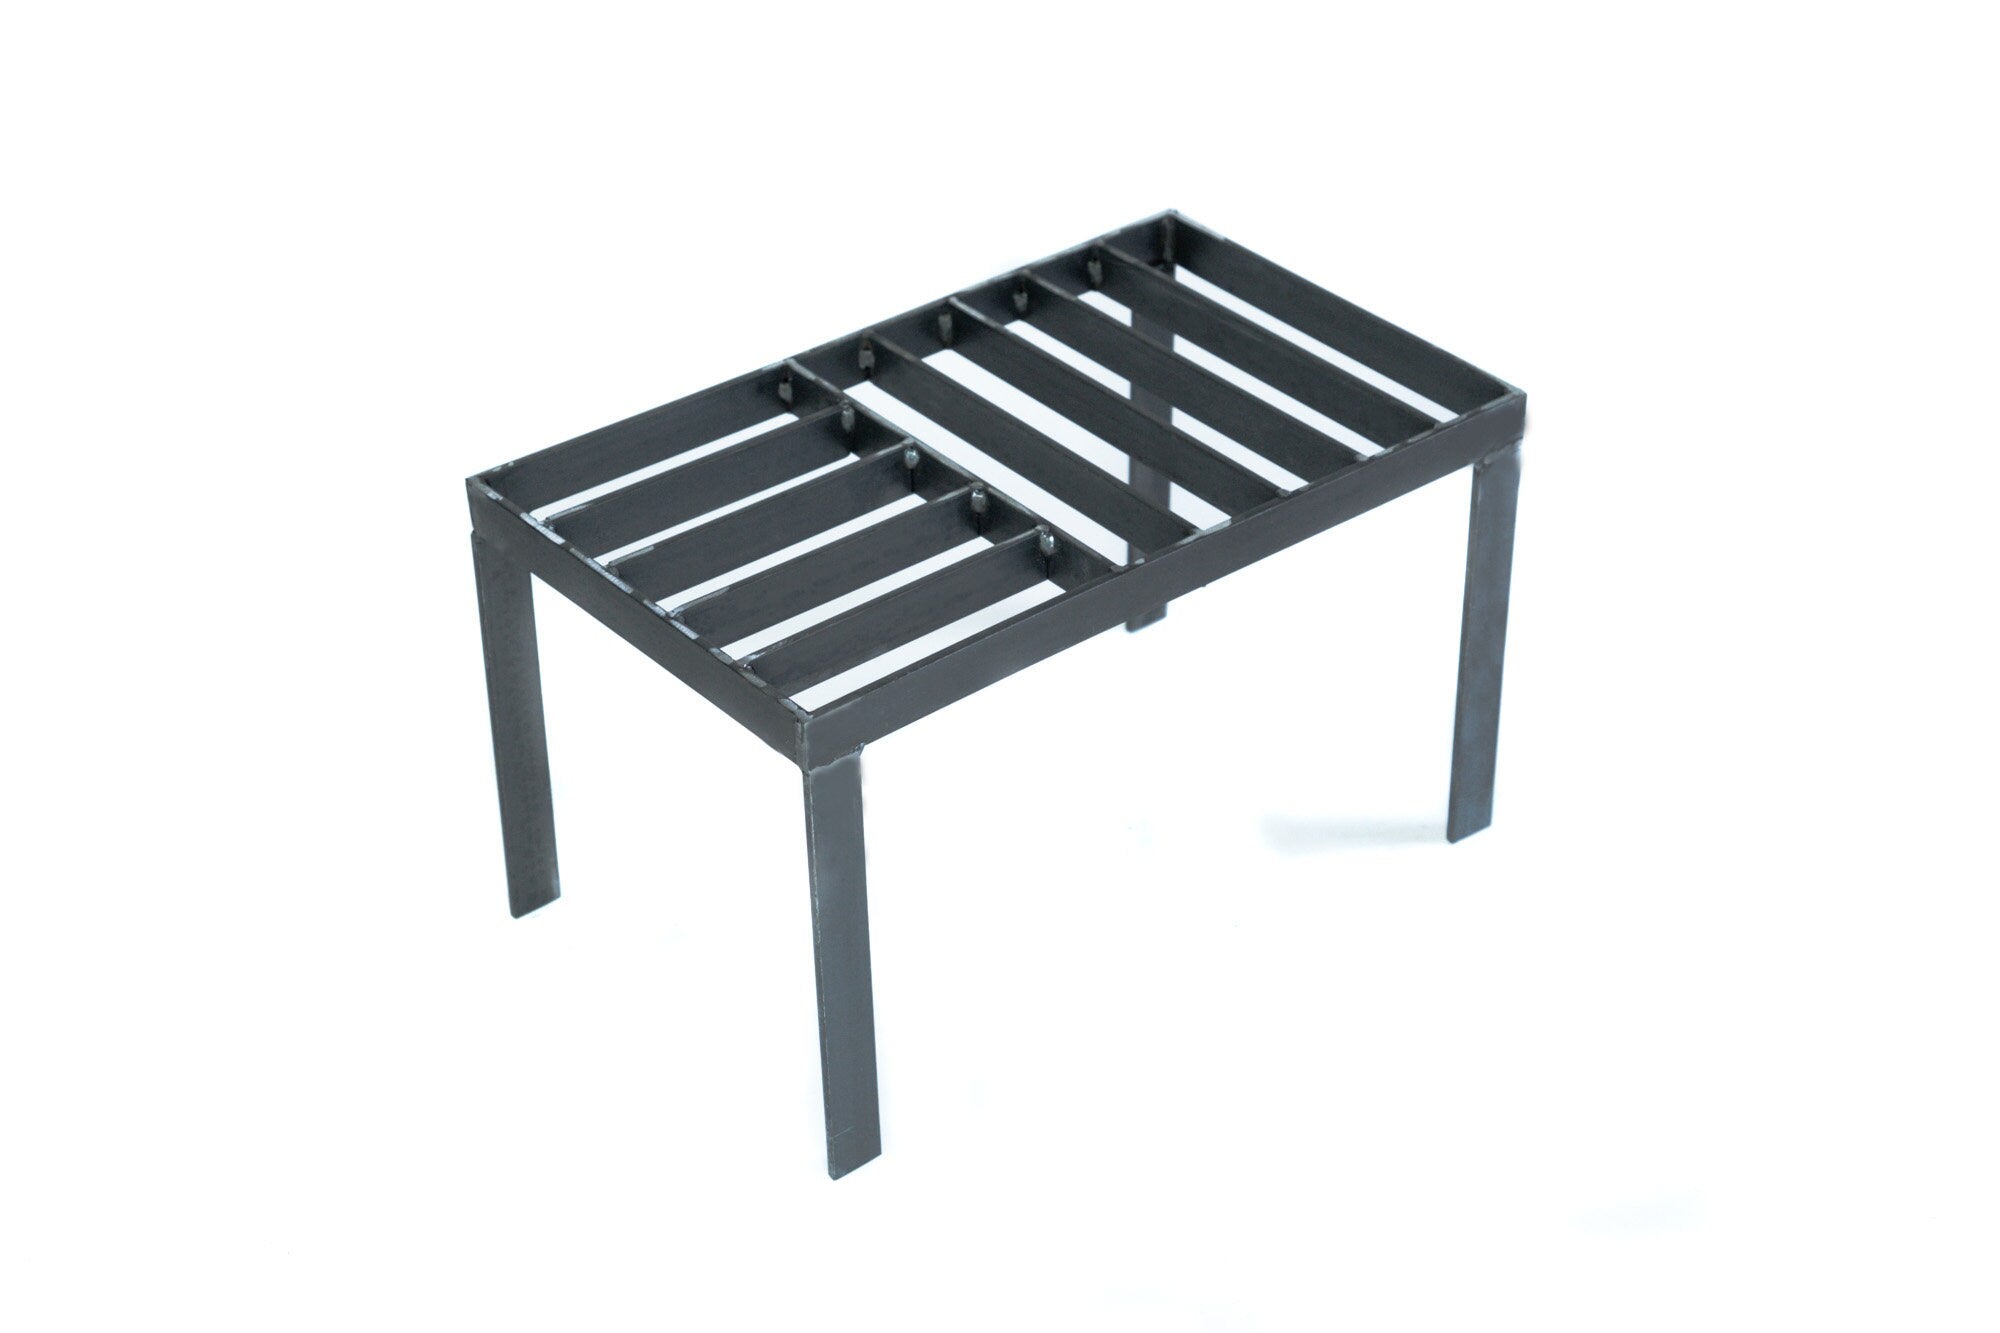 Gaucholife Grill Cooking Stands for the open fire. Heavy Duty Iron Contruccion 19.6 x 11.8 inches